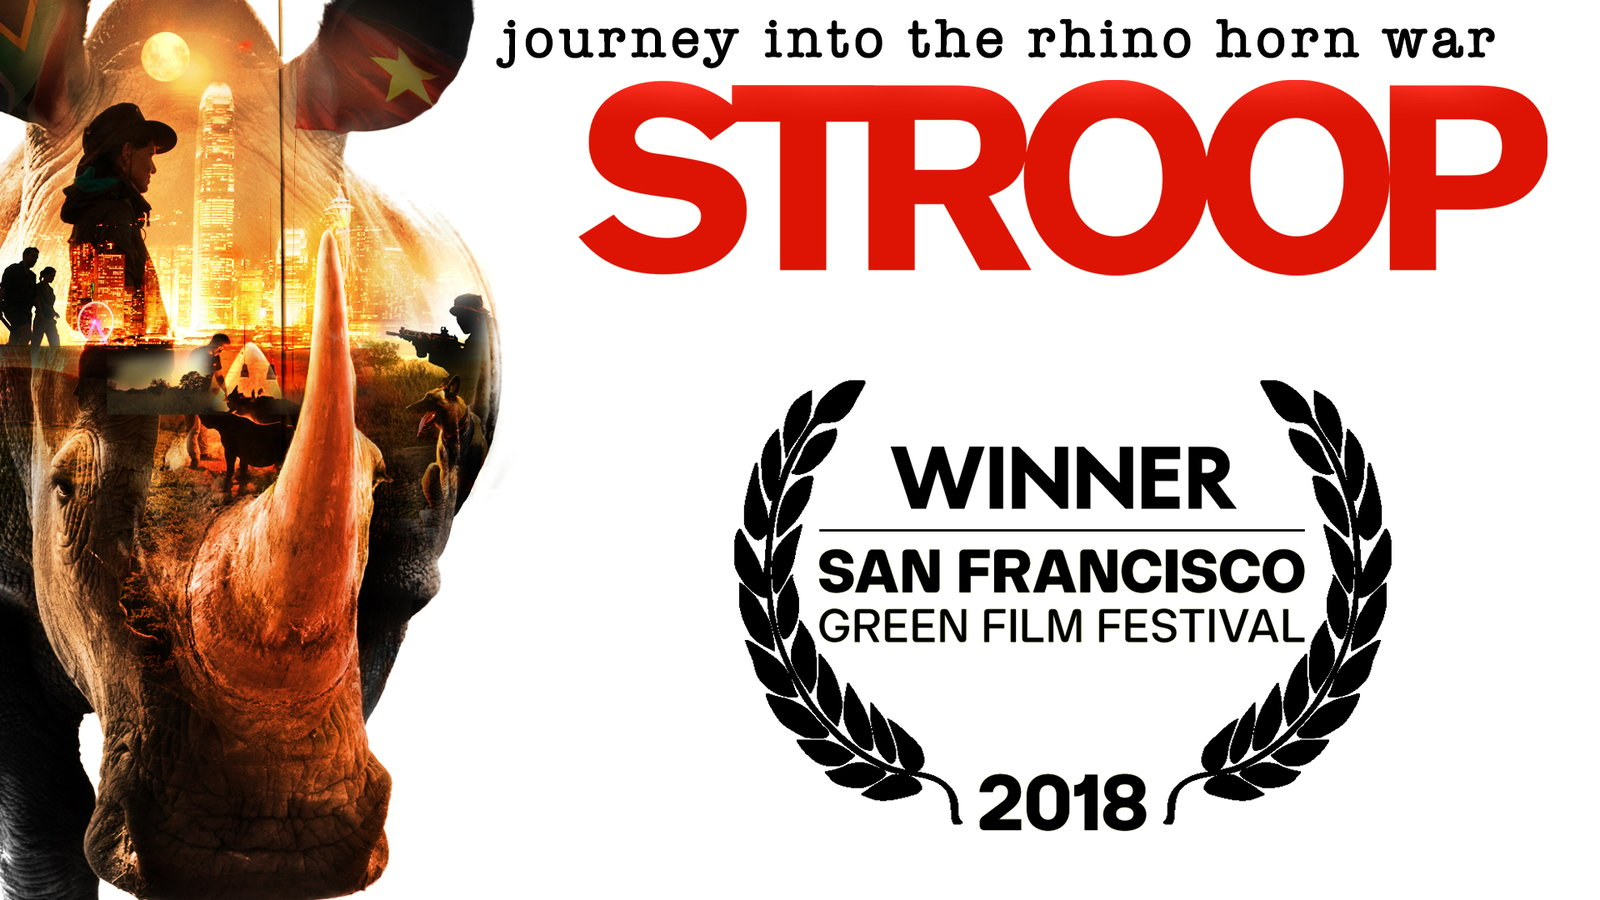 Stroop - Journey into the Rhino Horn War